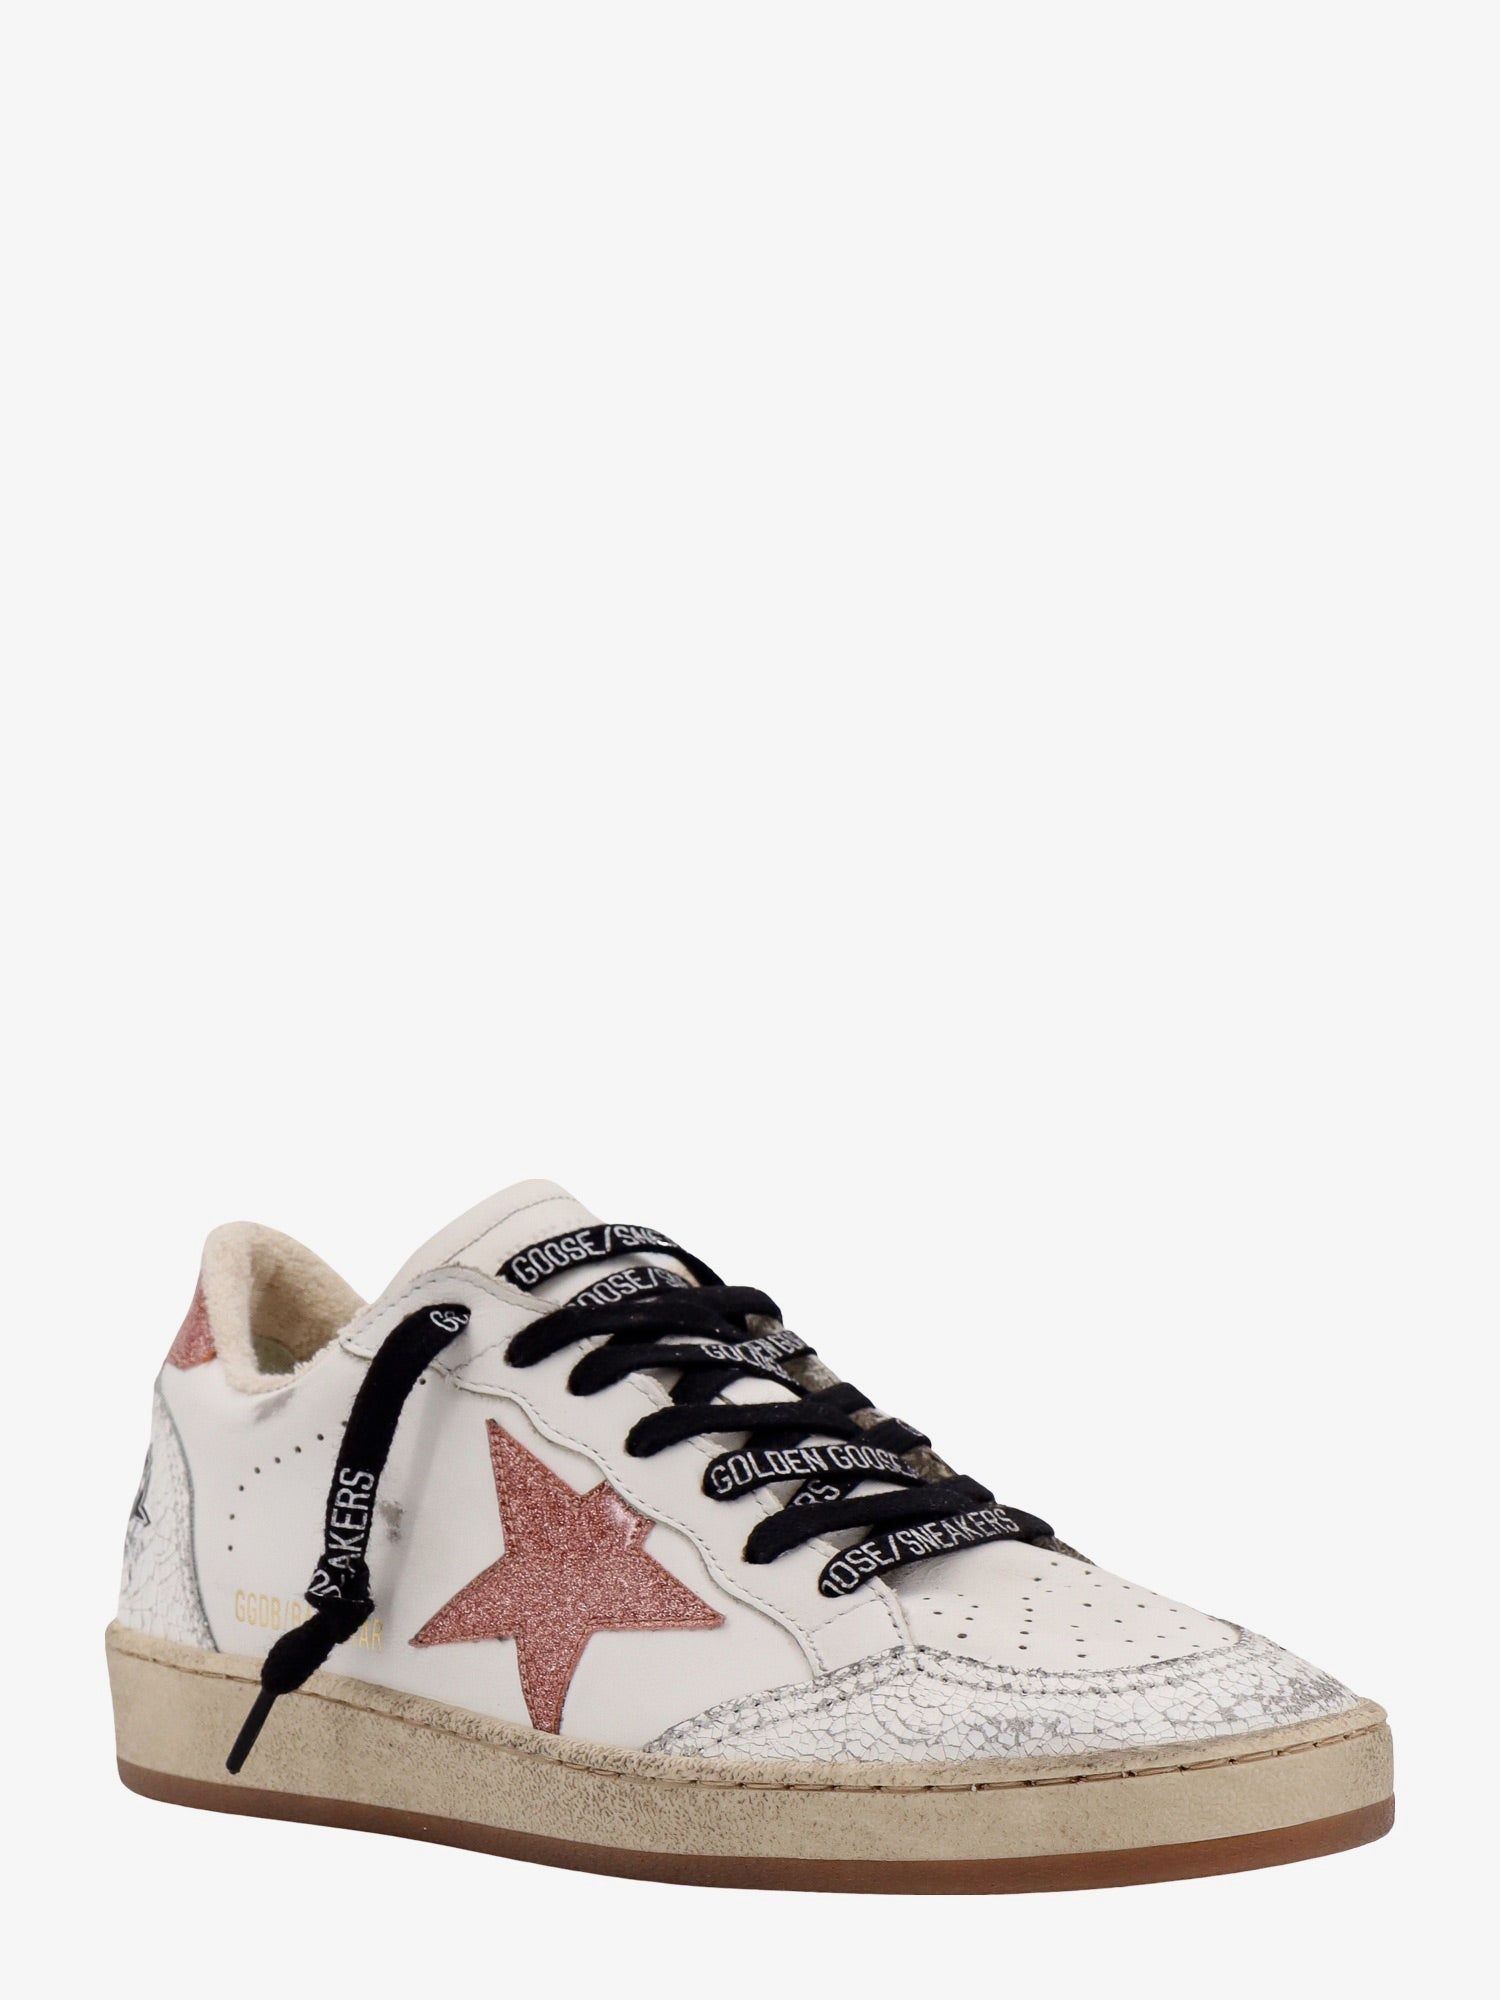 Golden Goose Deluxe Brand Woman Ball Star Woman White Sneakers - 2